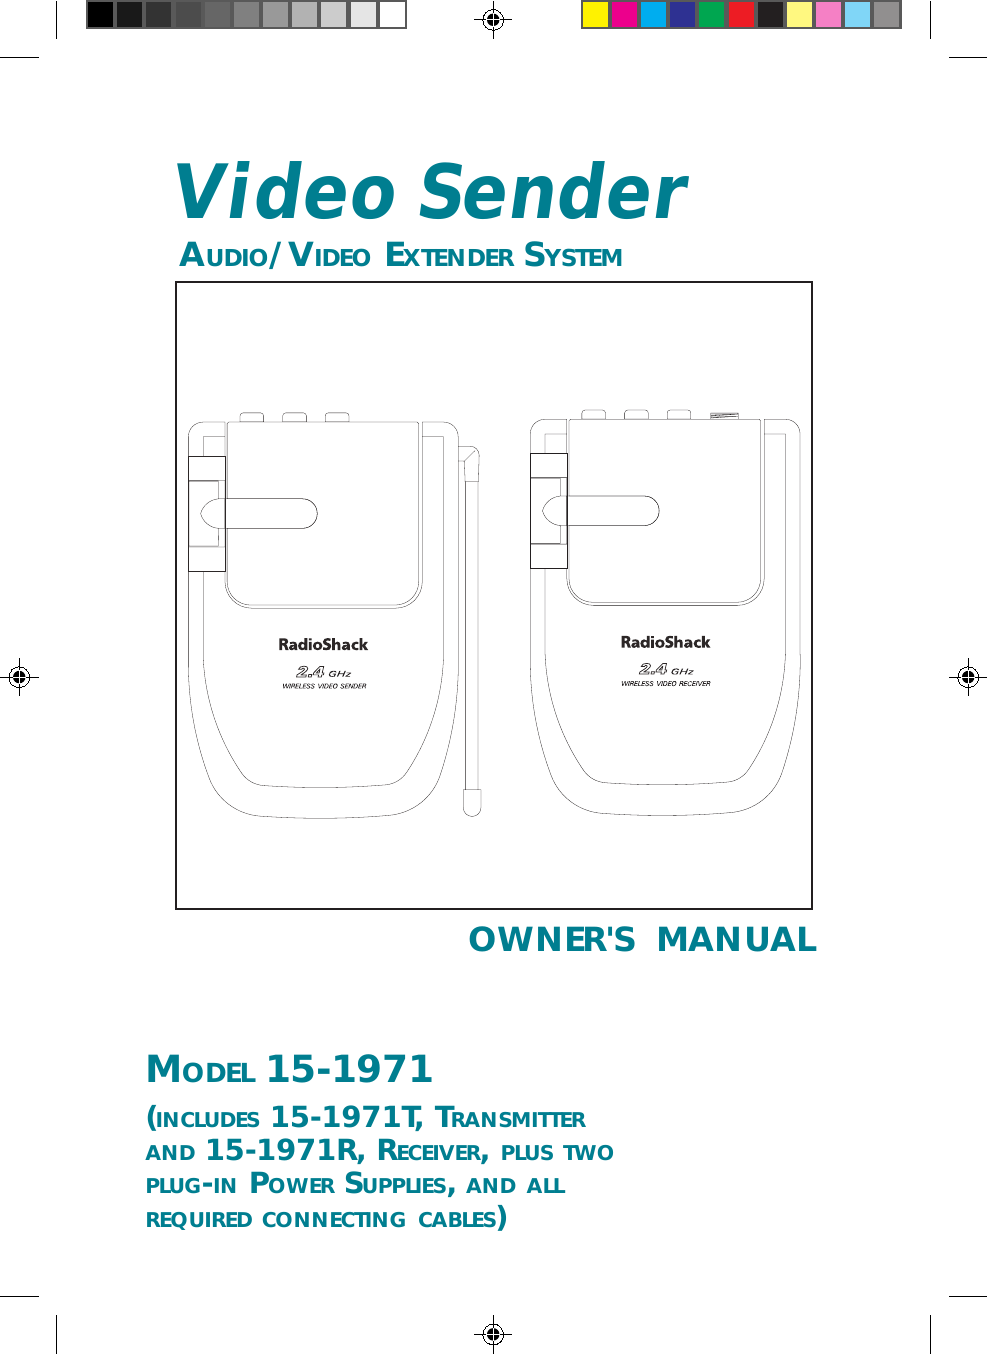 OWNER&apos;S  MANUALVideo Sender AUDIO/VIDEO EXTENDER SYSTEMMODEL 15-1971(INCLUDES 15-1971T, TRANSMITTERAND 15-1971R, RECEIVER, PLUS TWOPLUG-IN POWER SUPPLIES, AND ALLREQUIRED CONNECTING CABLES)